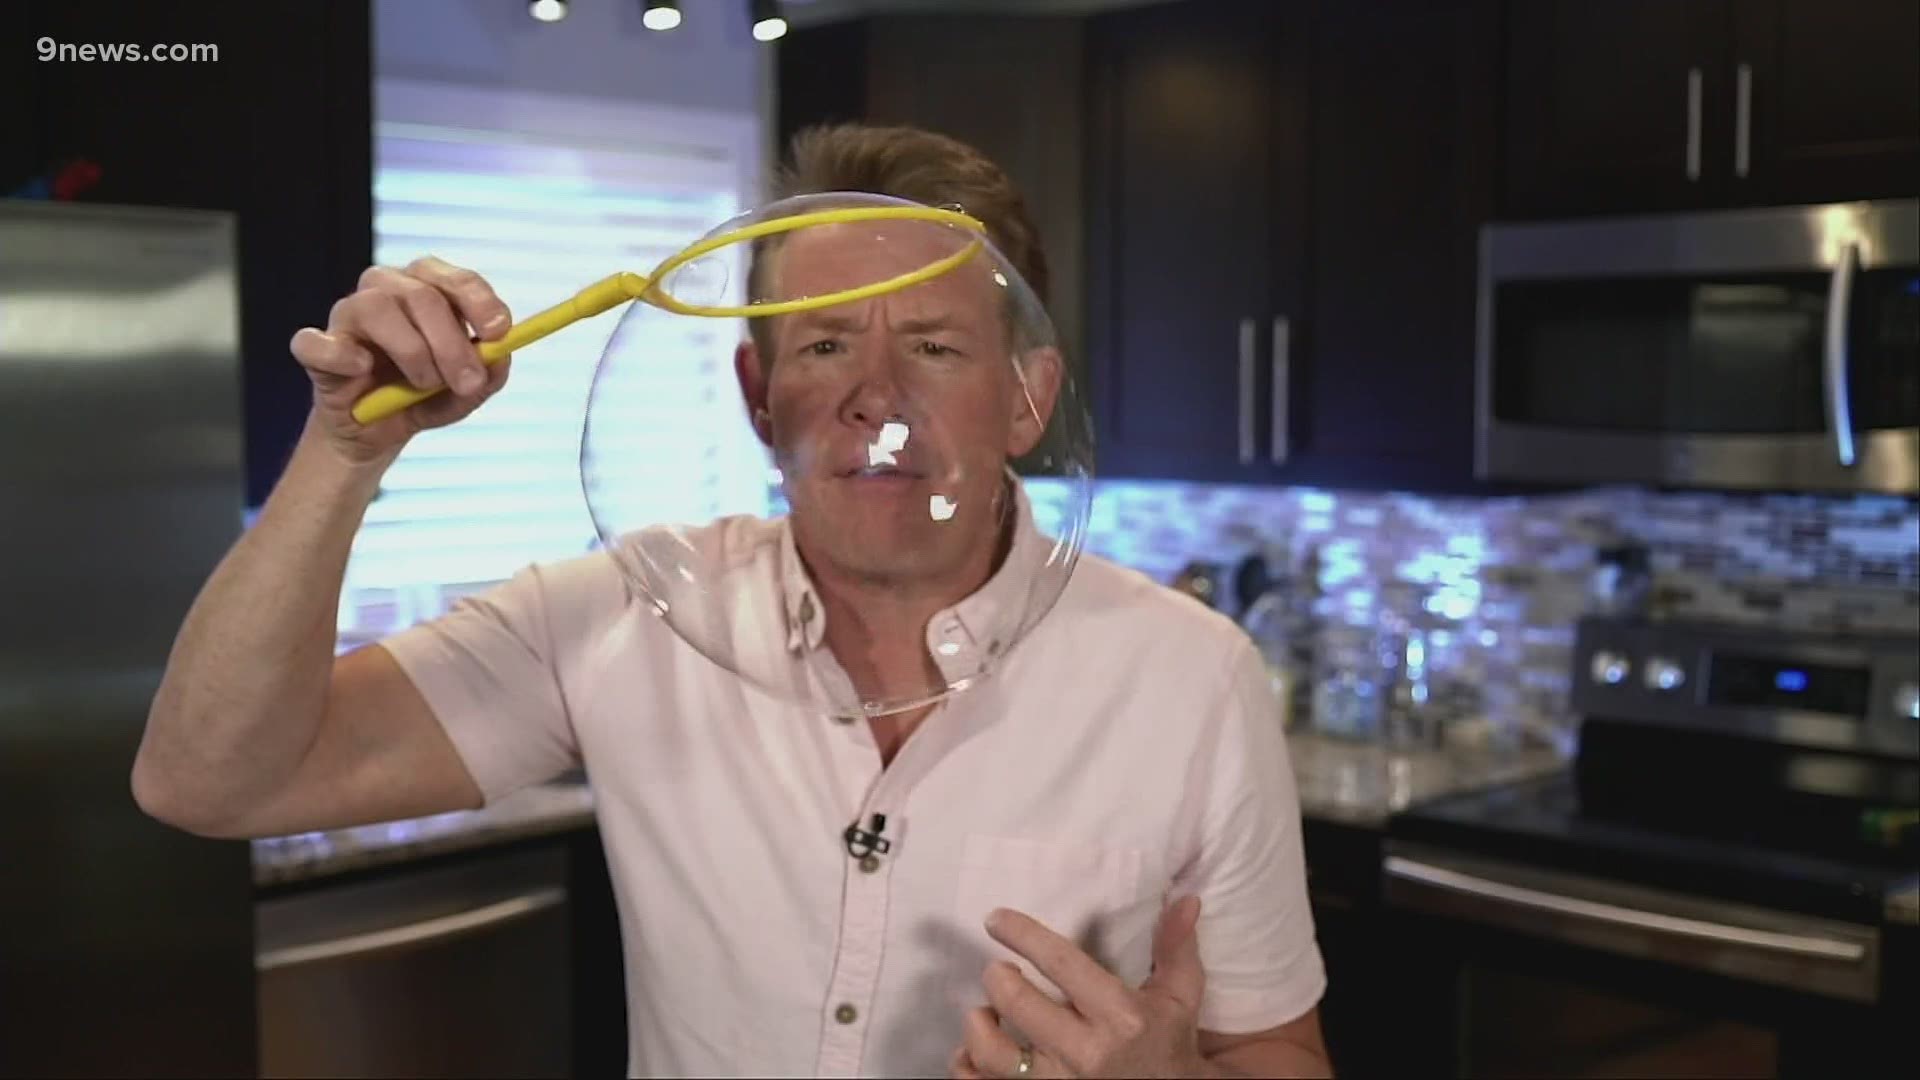 Science guy Steve Spangler shares his bubble chemistry secrets in this Science Minute.